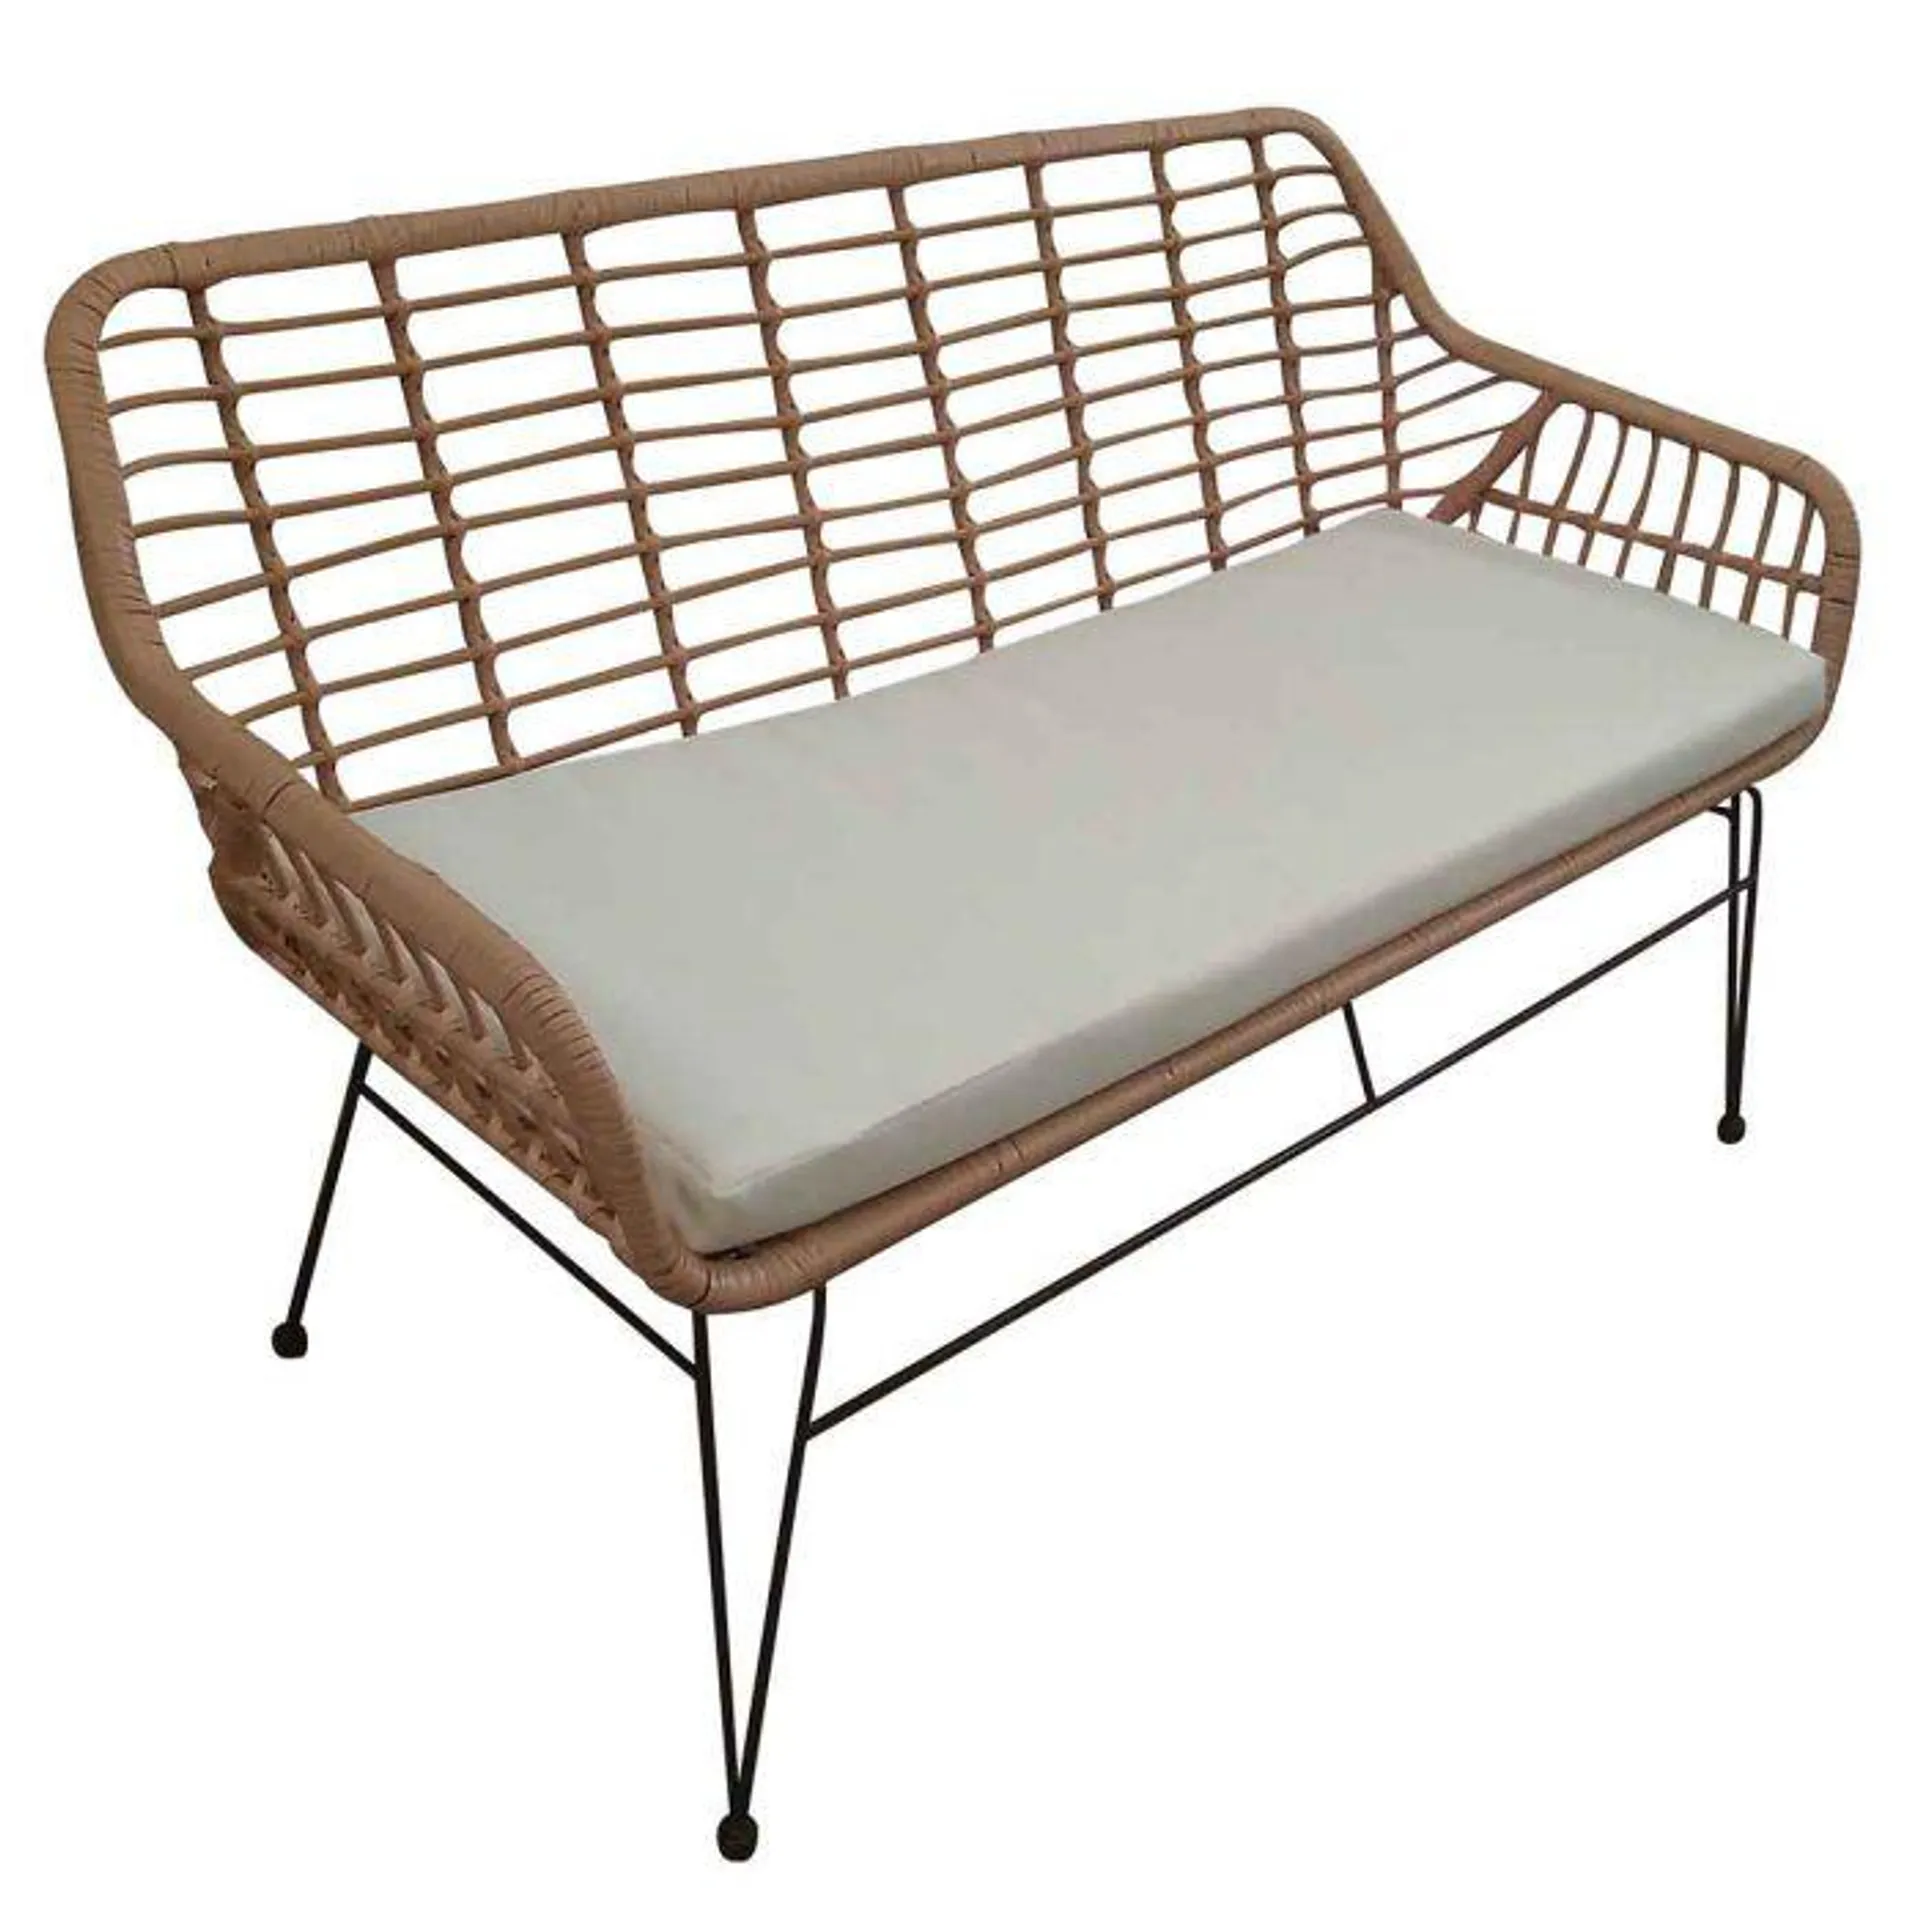 Reims Cane Effect Bench